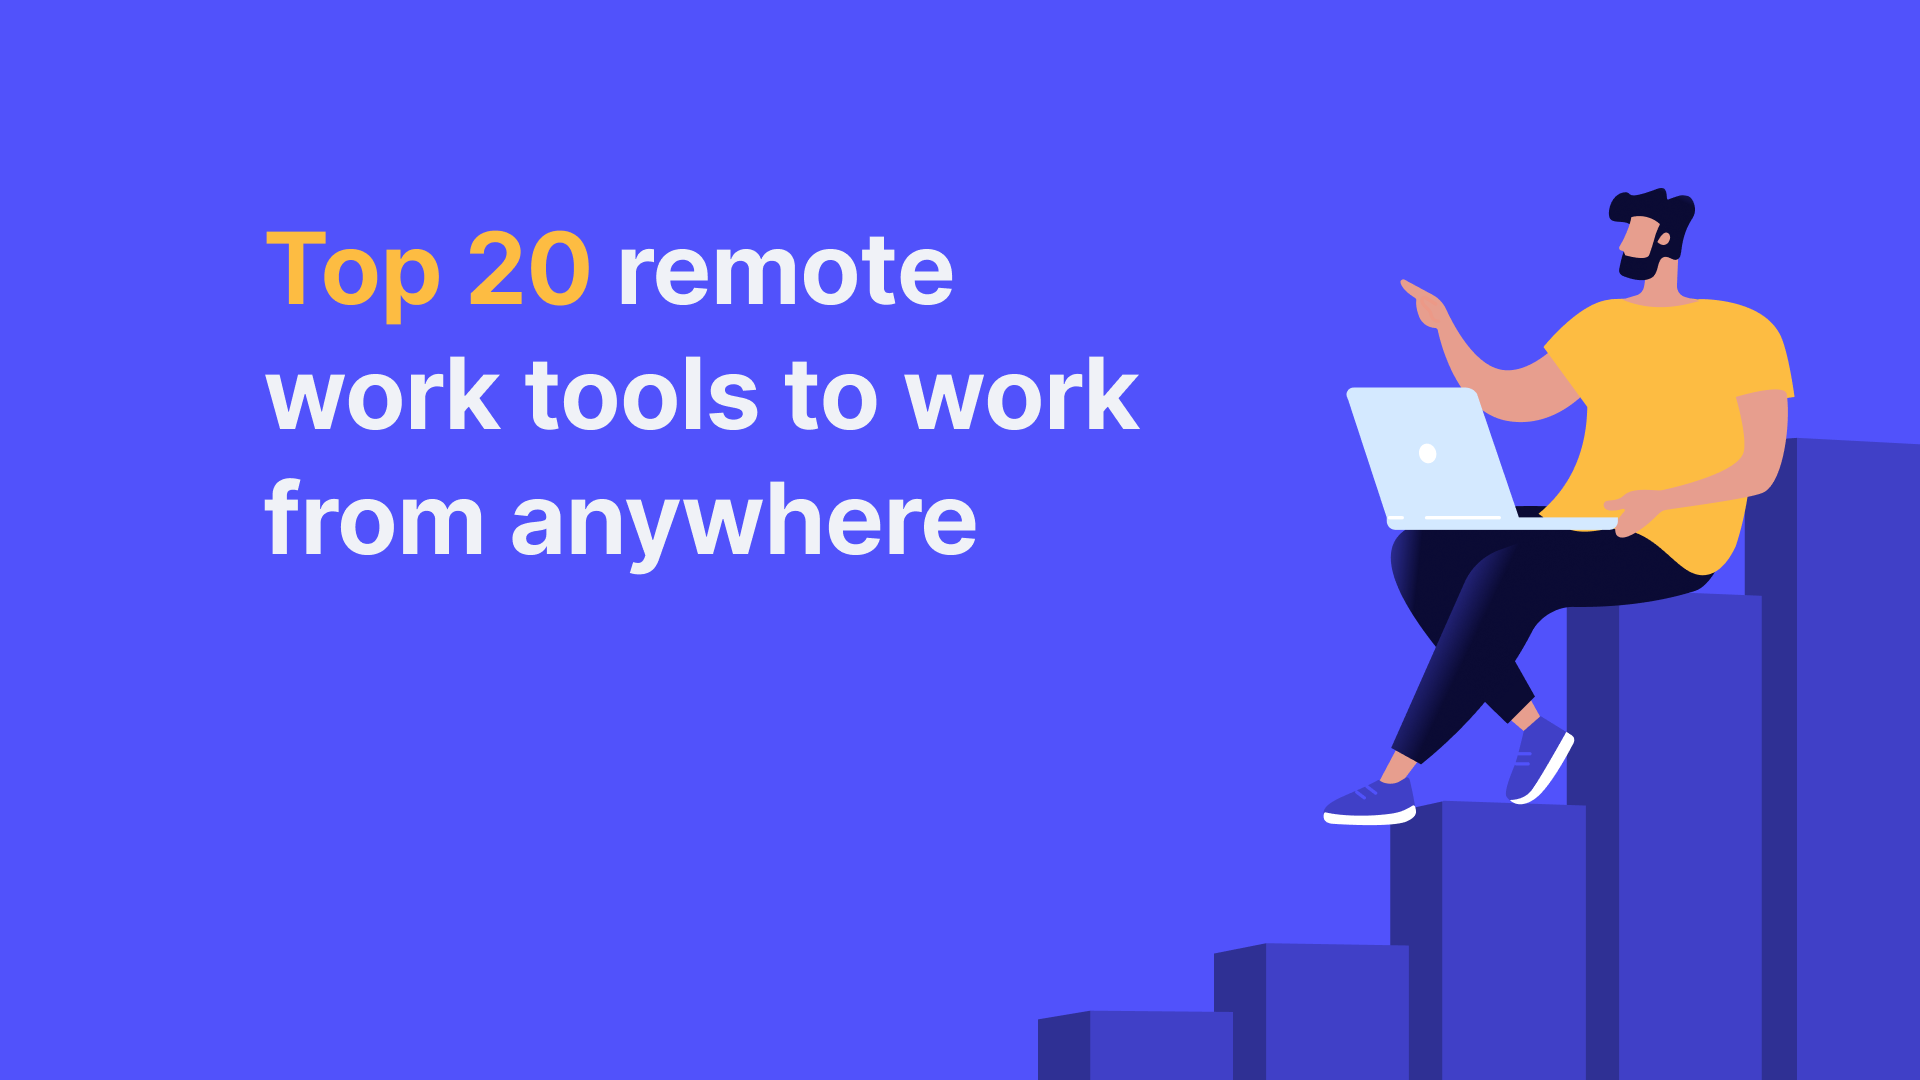 Top 20 Remote Work Tools to Work From Anywhere